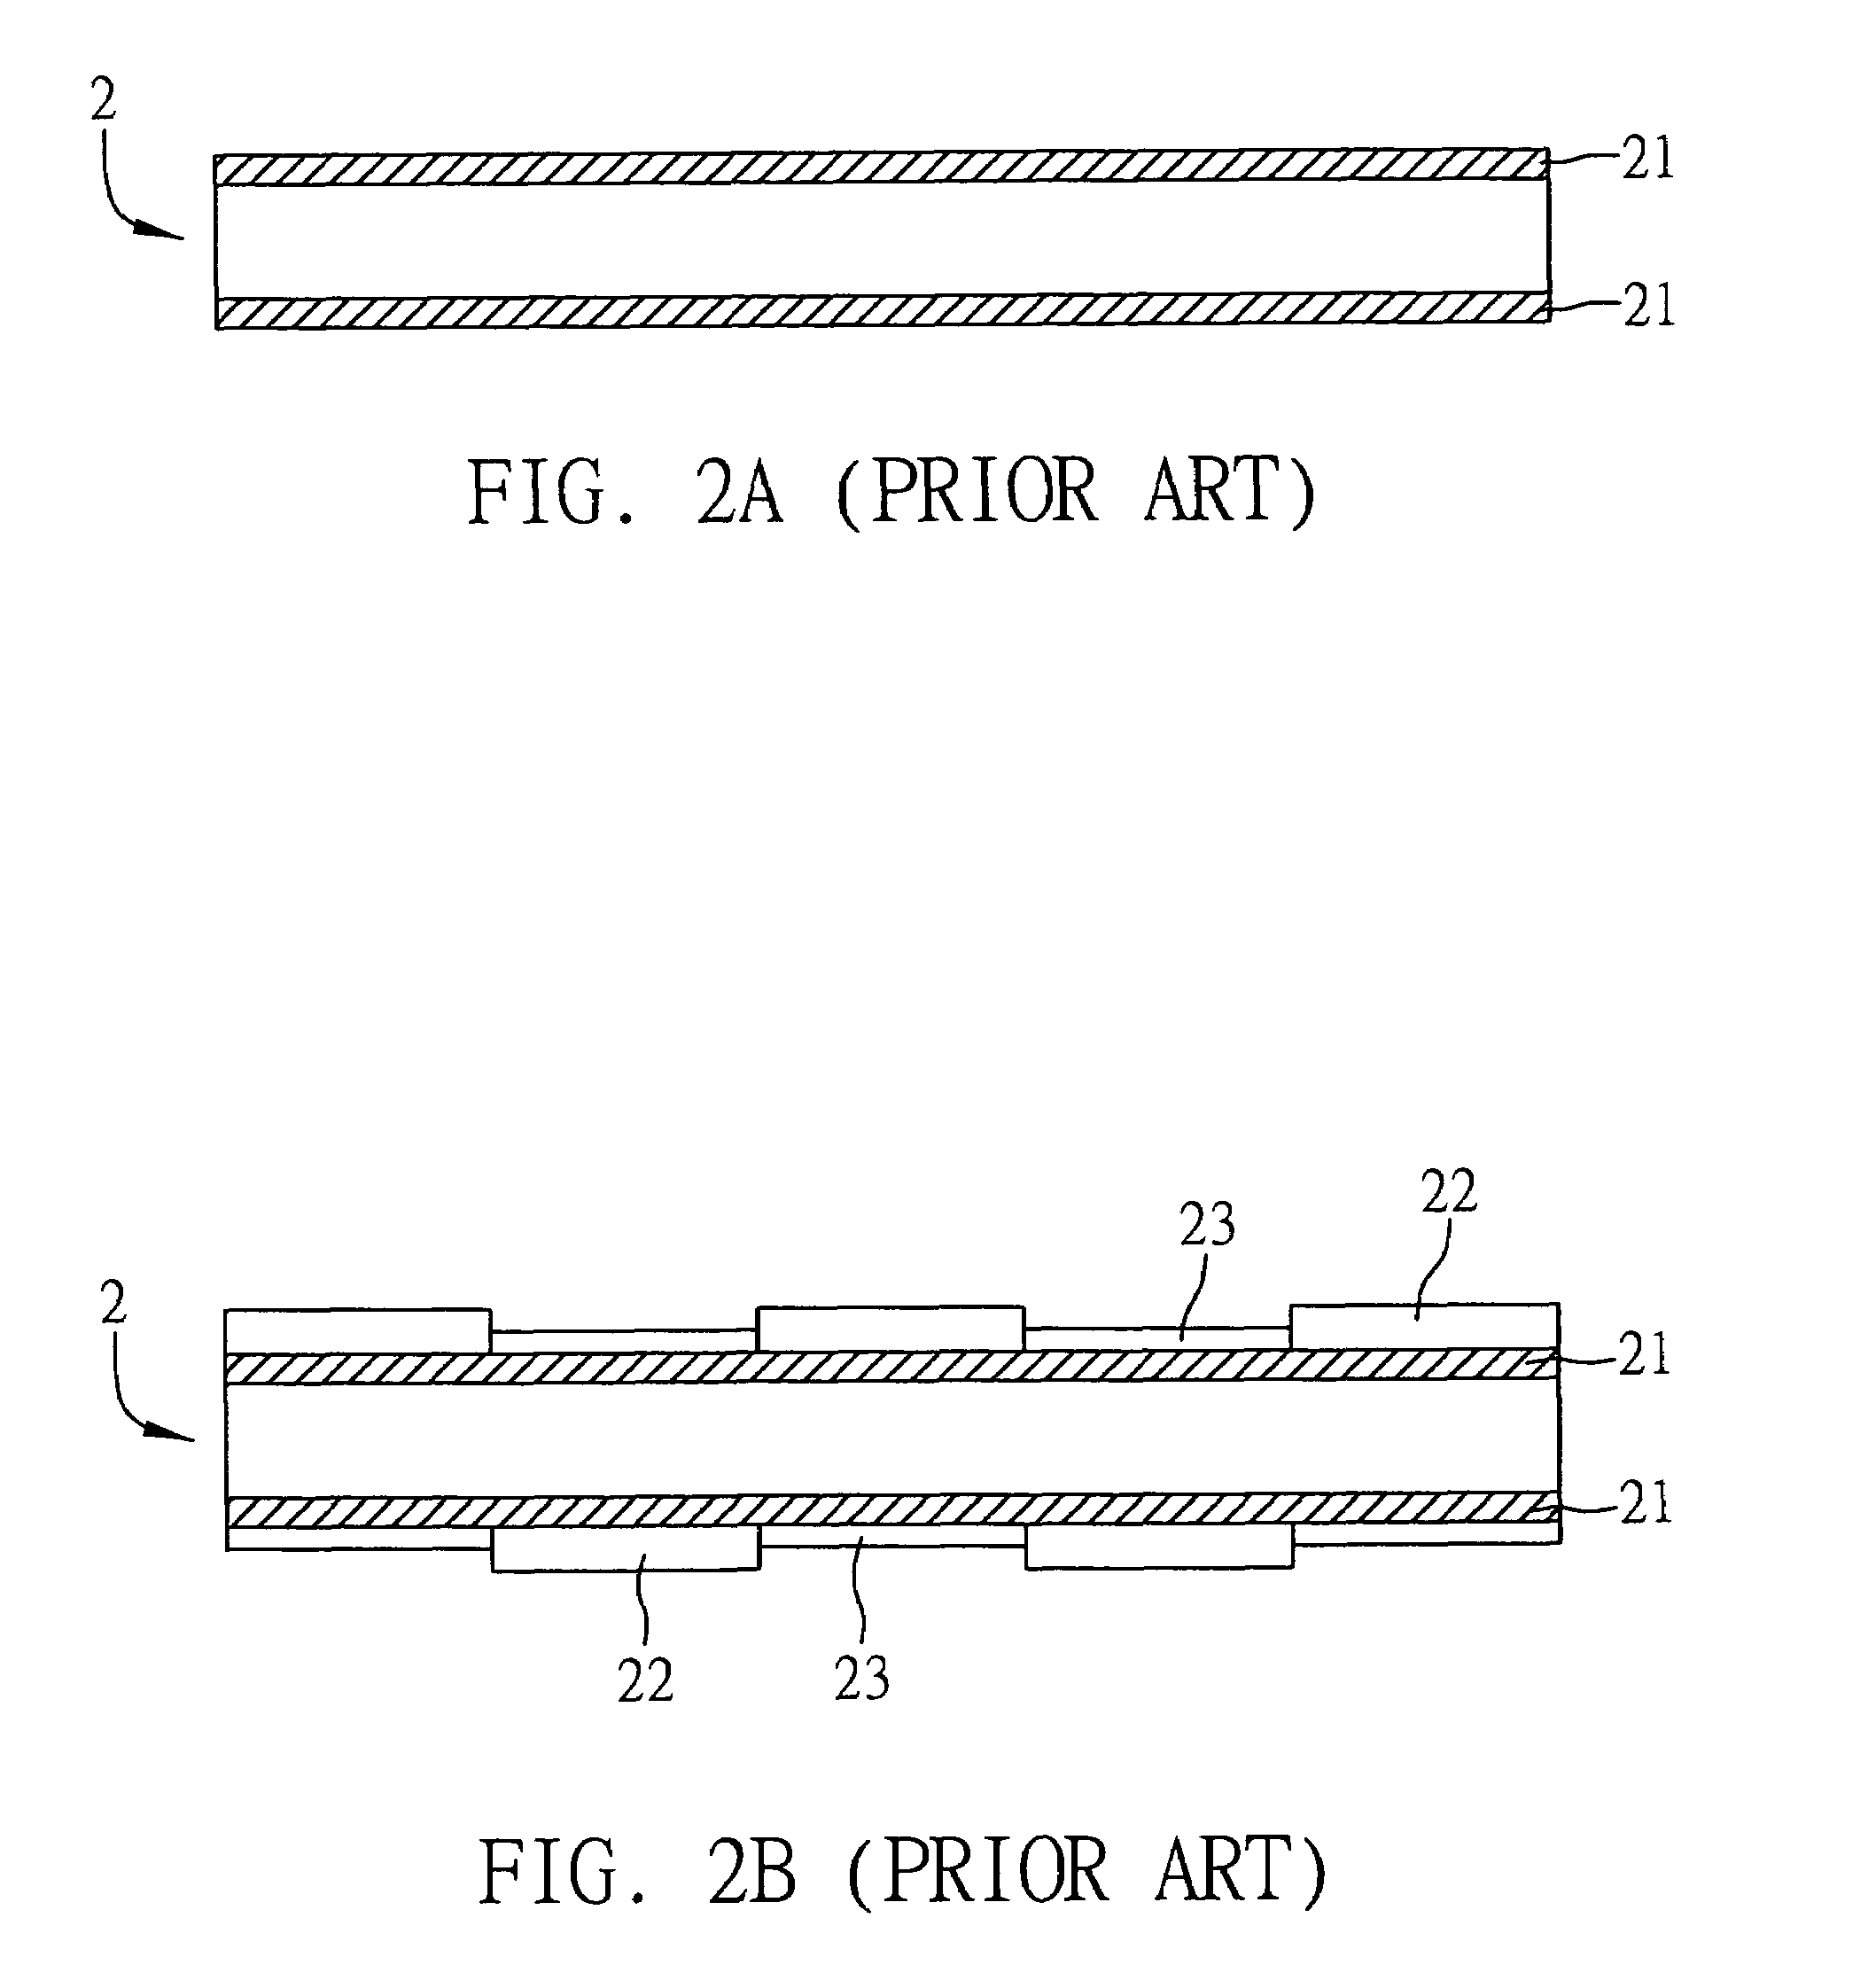 Method for fabricating semiconductor package substrate with plated metal layer over conductive pad